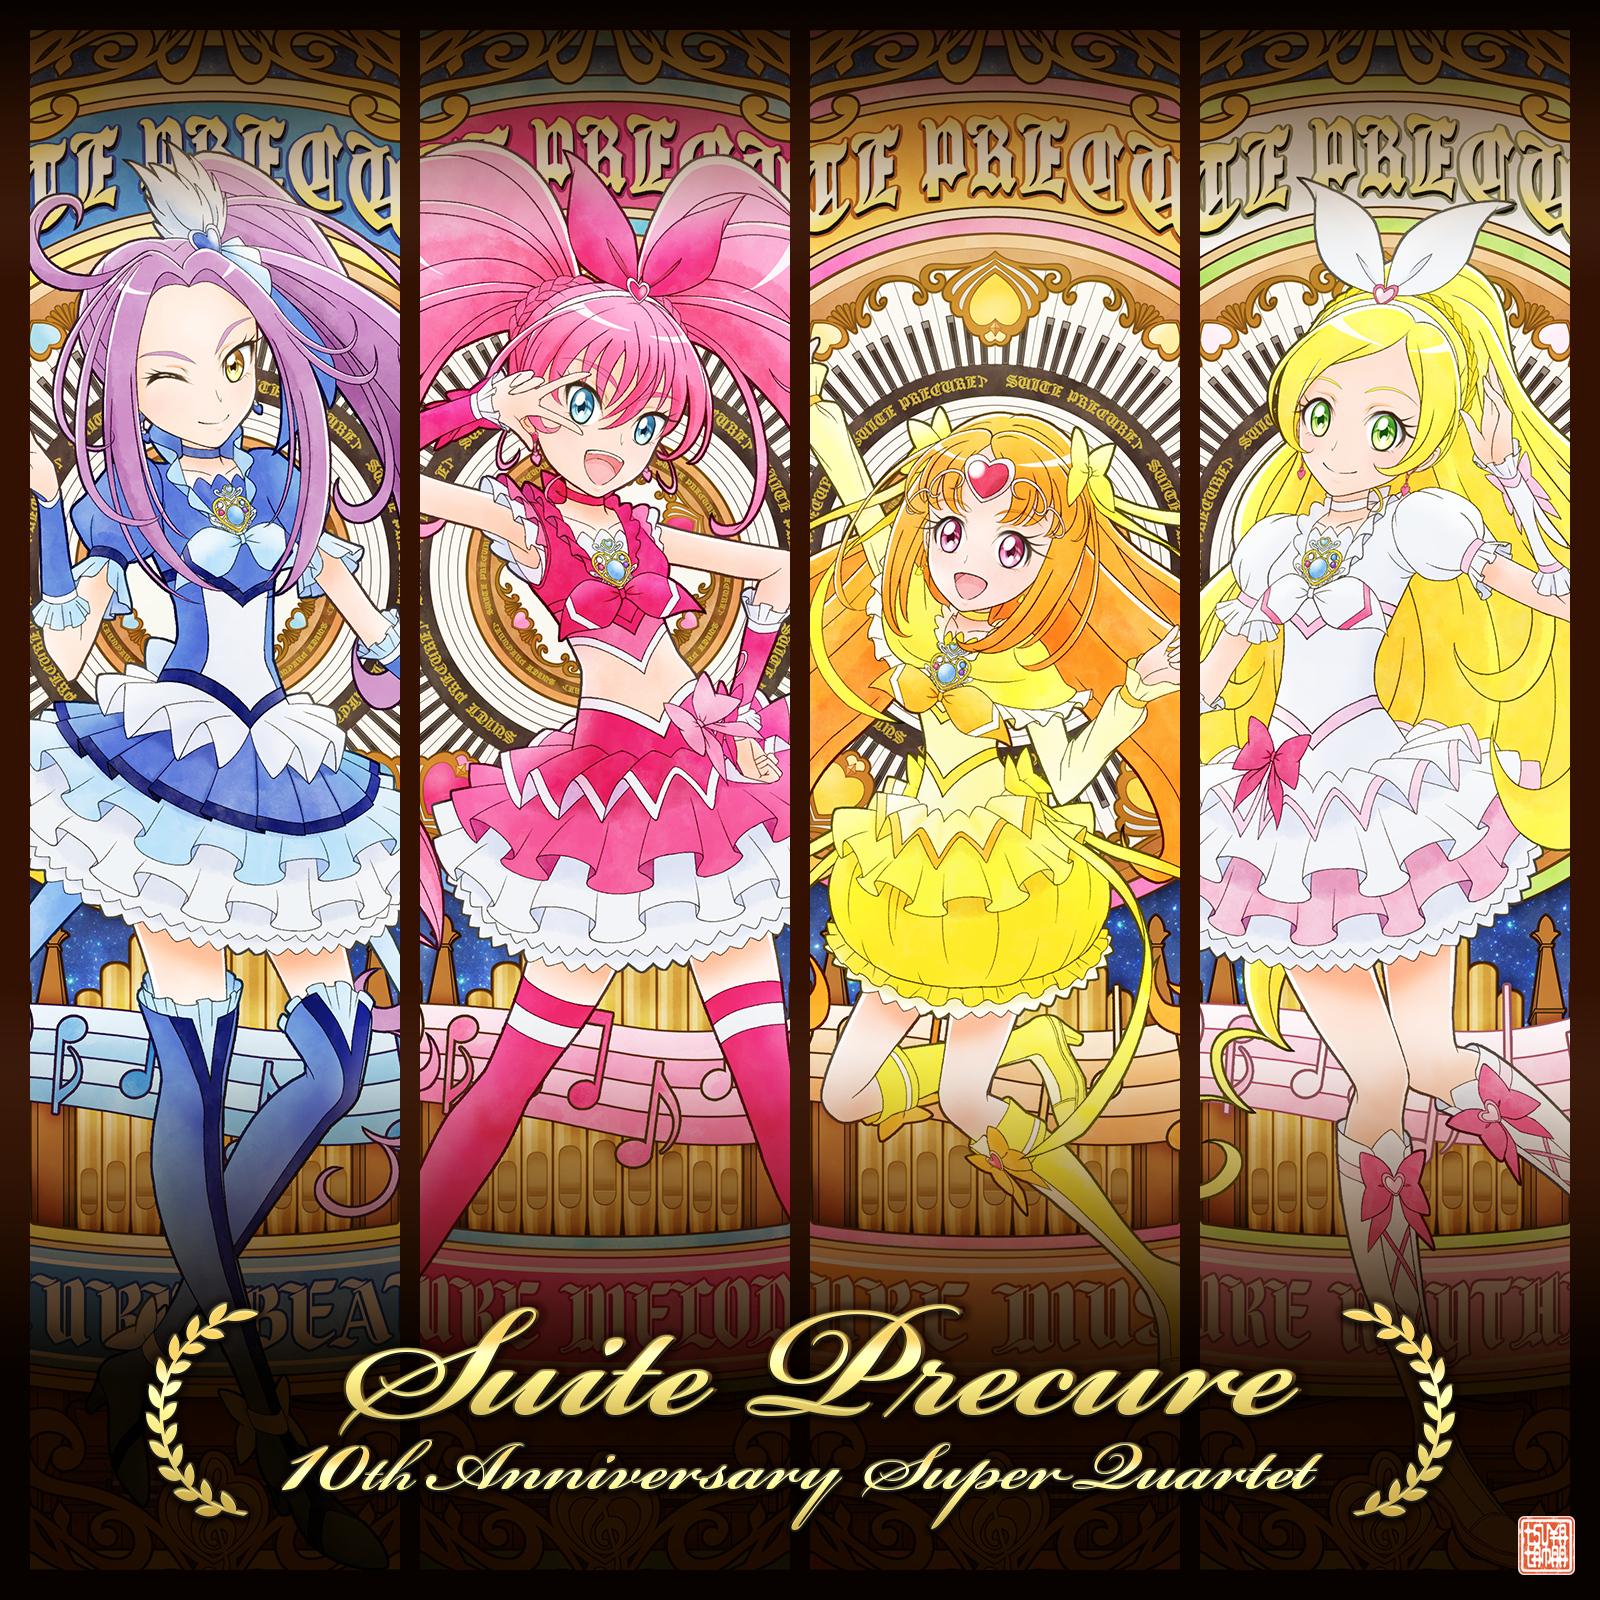 Anime Anime Girls Suite Precure Pretty Cure Magical Girls Cure Muse Cure Rhythm Cure Melody Cure Bea 1600x1600